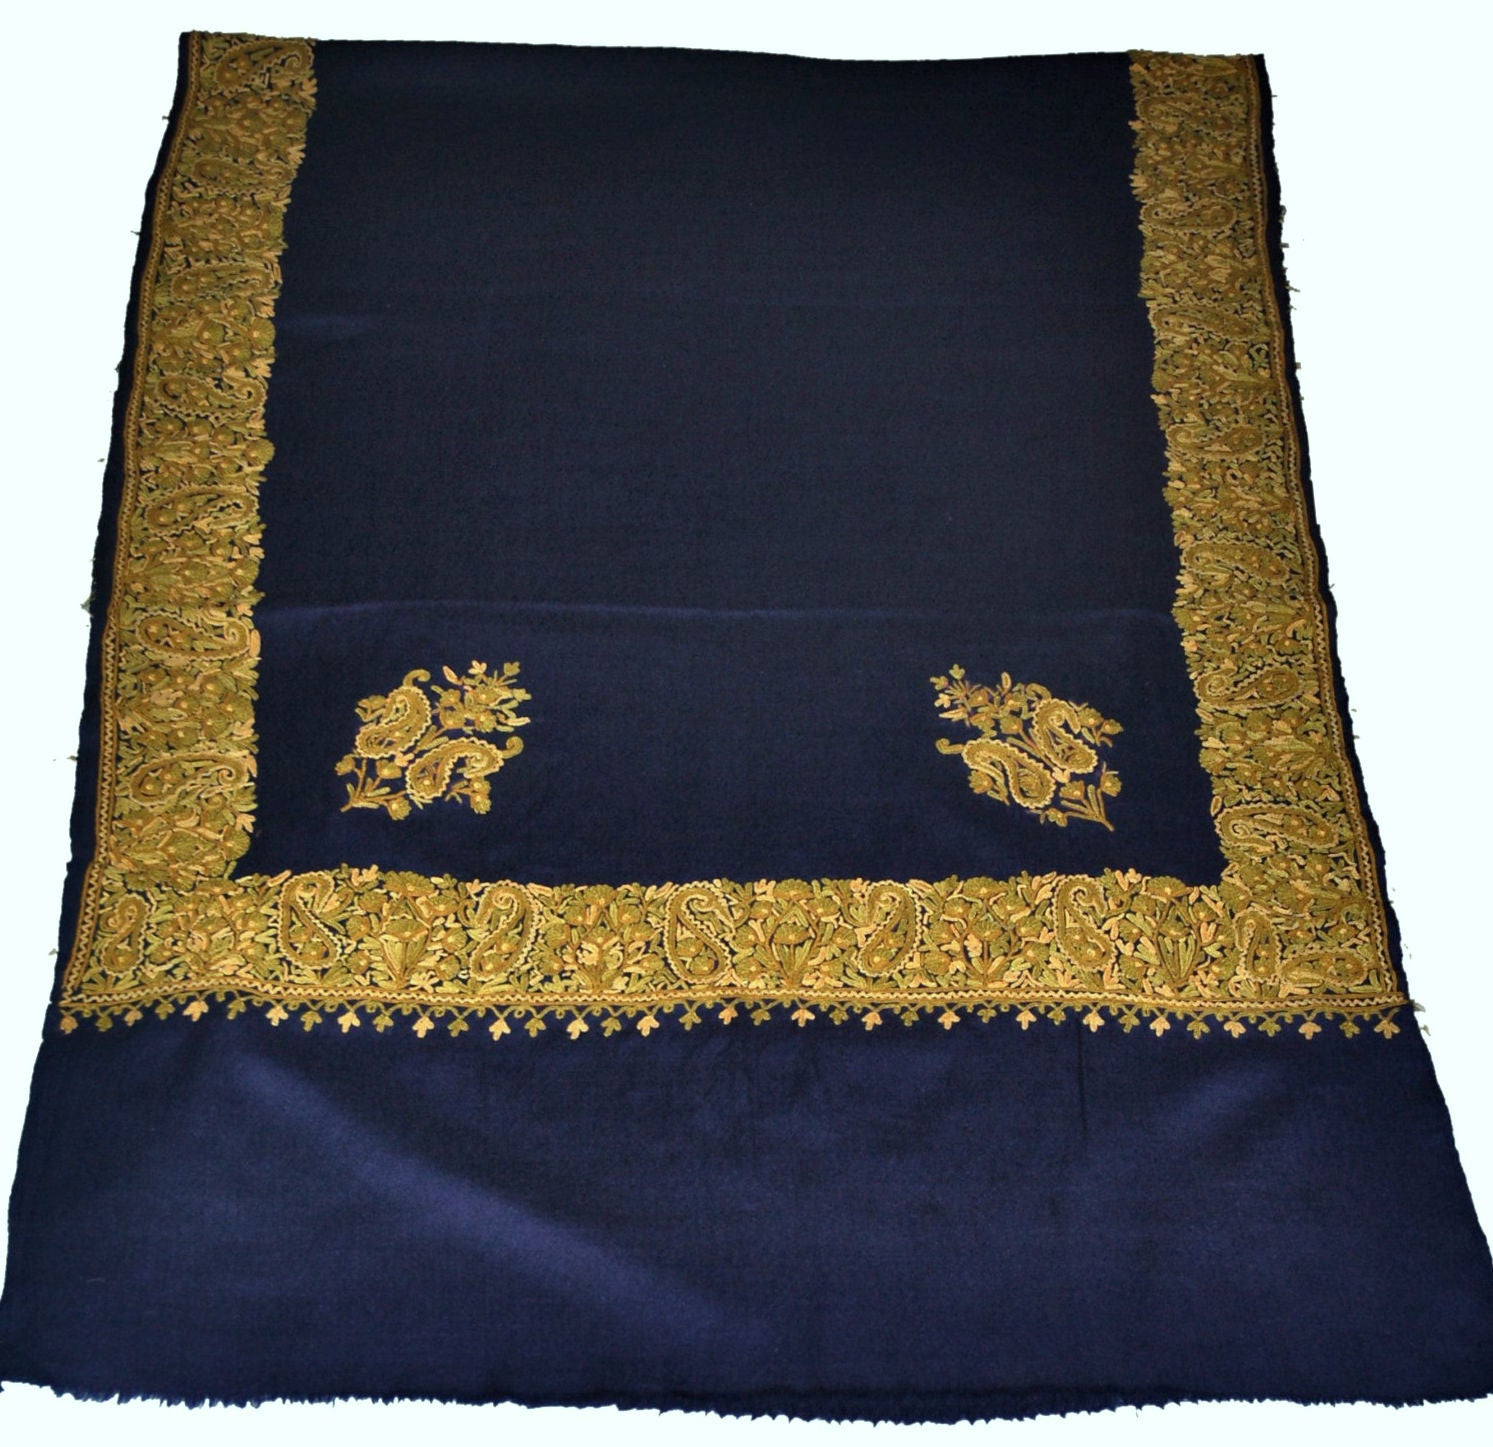 Embroidered Wool Shawl Wrap Throw Navy, Multicolor Embroidery #WS-403